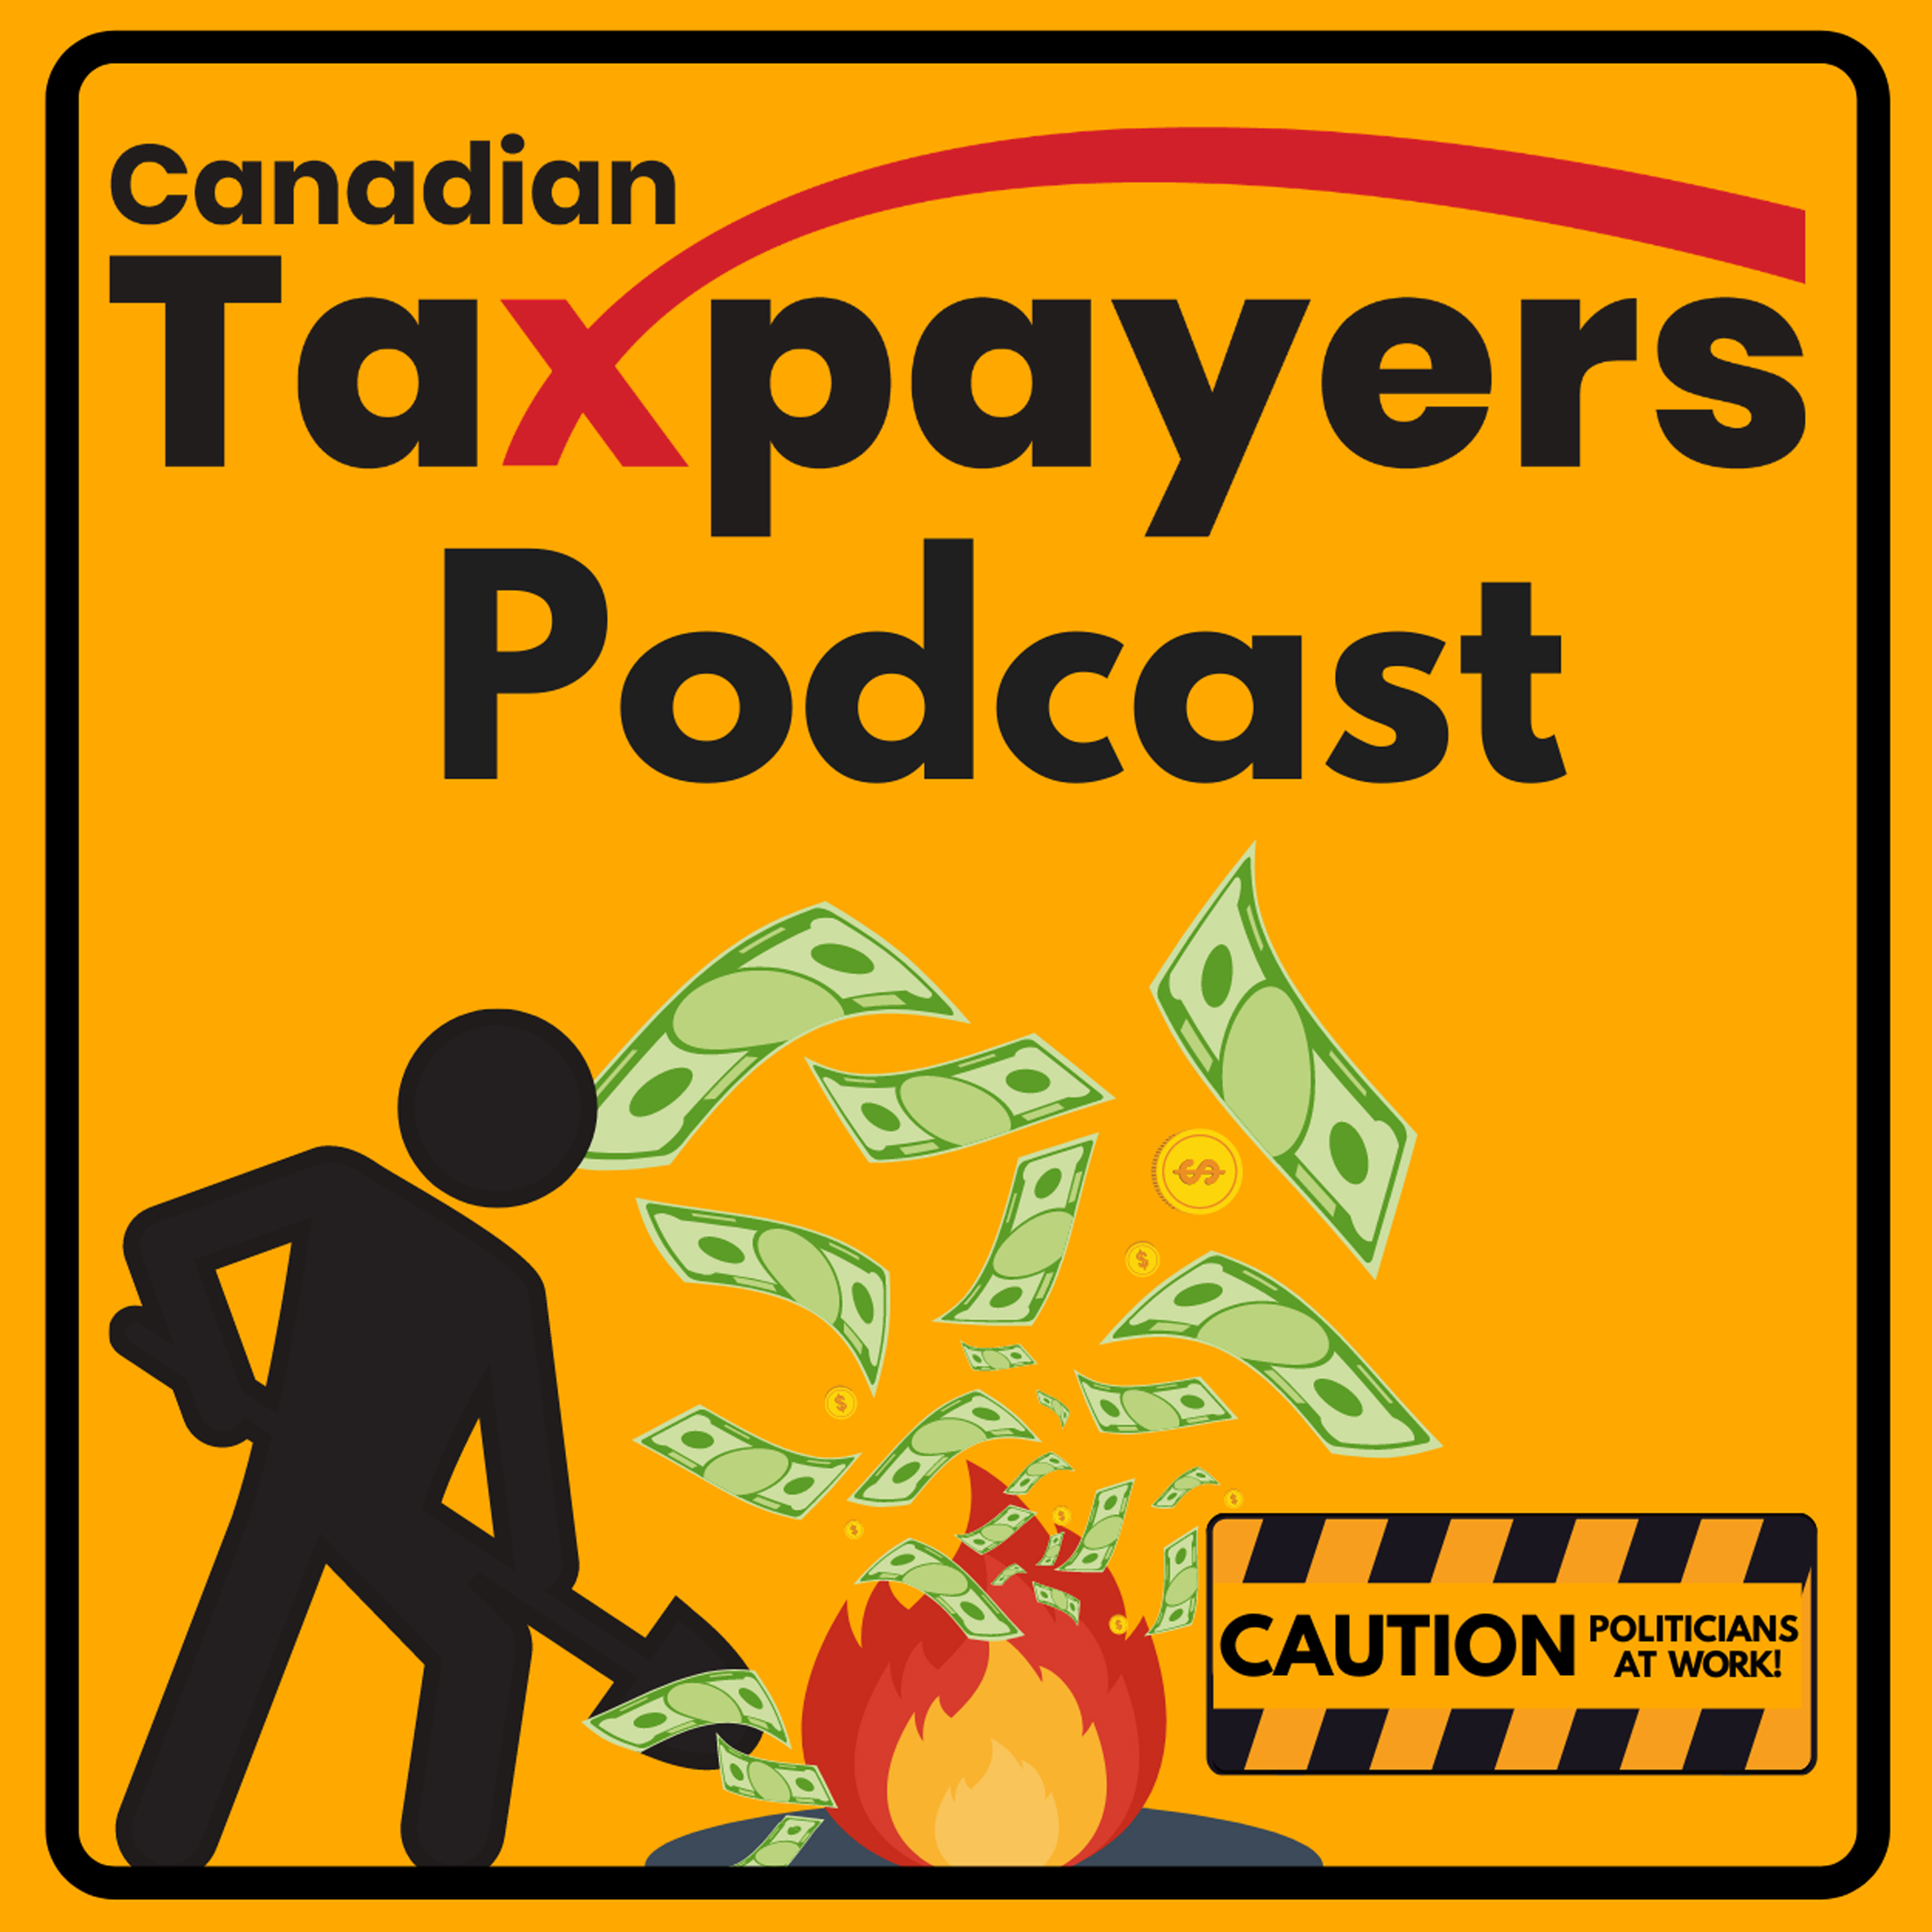 #66 Trudeau’s Tax Hikes, O’Toole Carbon Tax Price Tag, One Expensive Toilet  